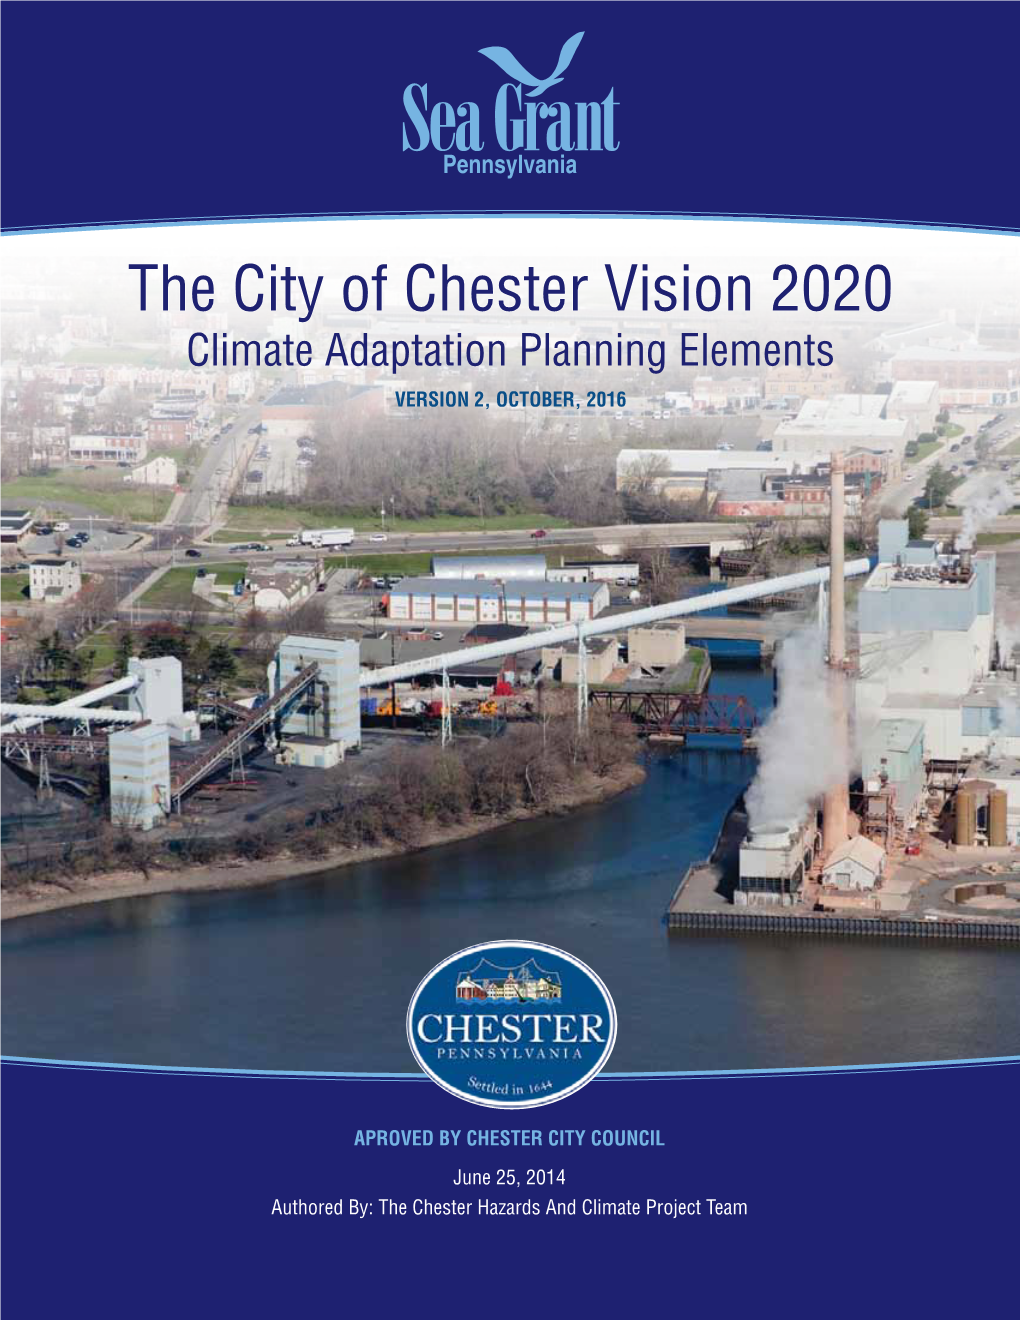 The City of Chester Vision 2020 Climate Adaptation Planning Elements Version 2, October, 2016